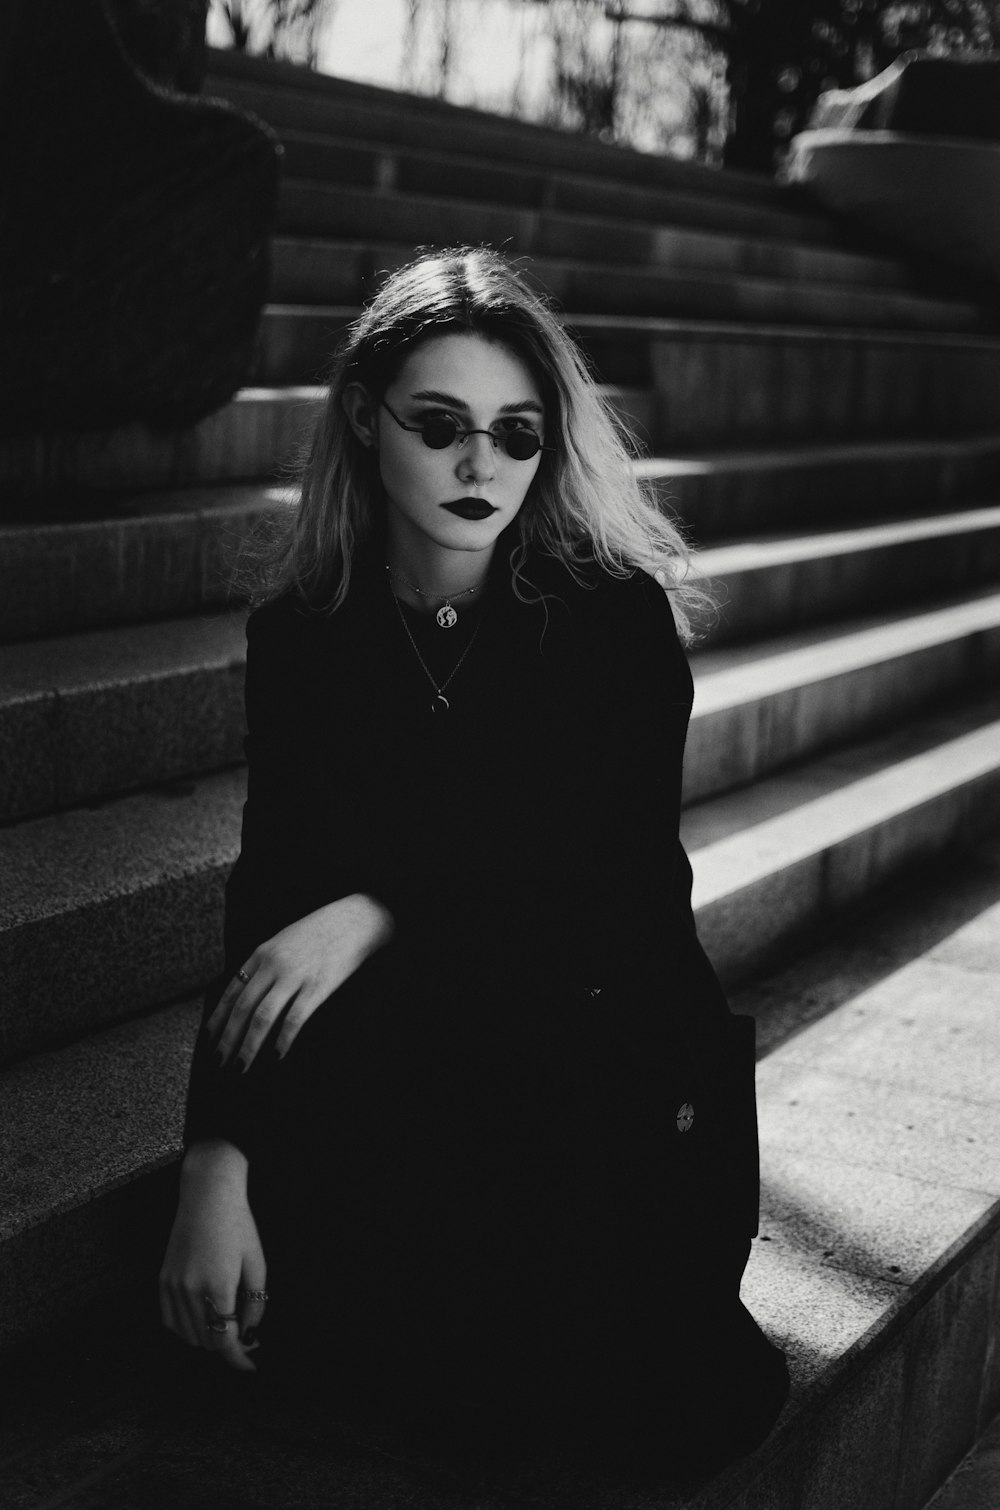 a woman sitting on some steps wearing sunglasses